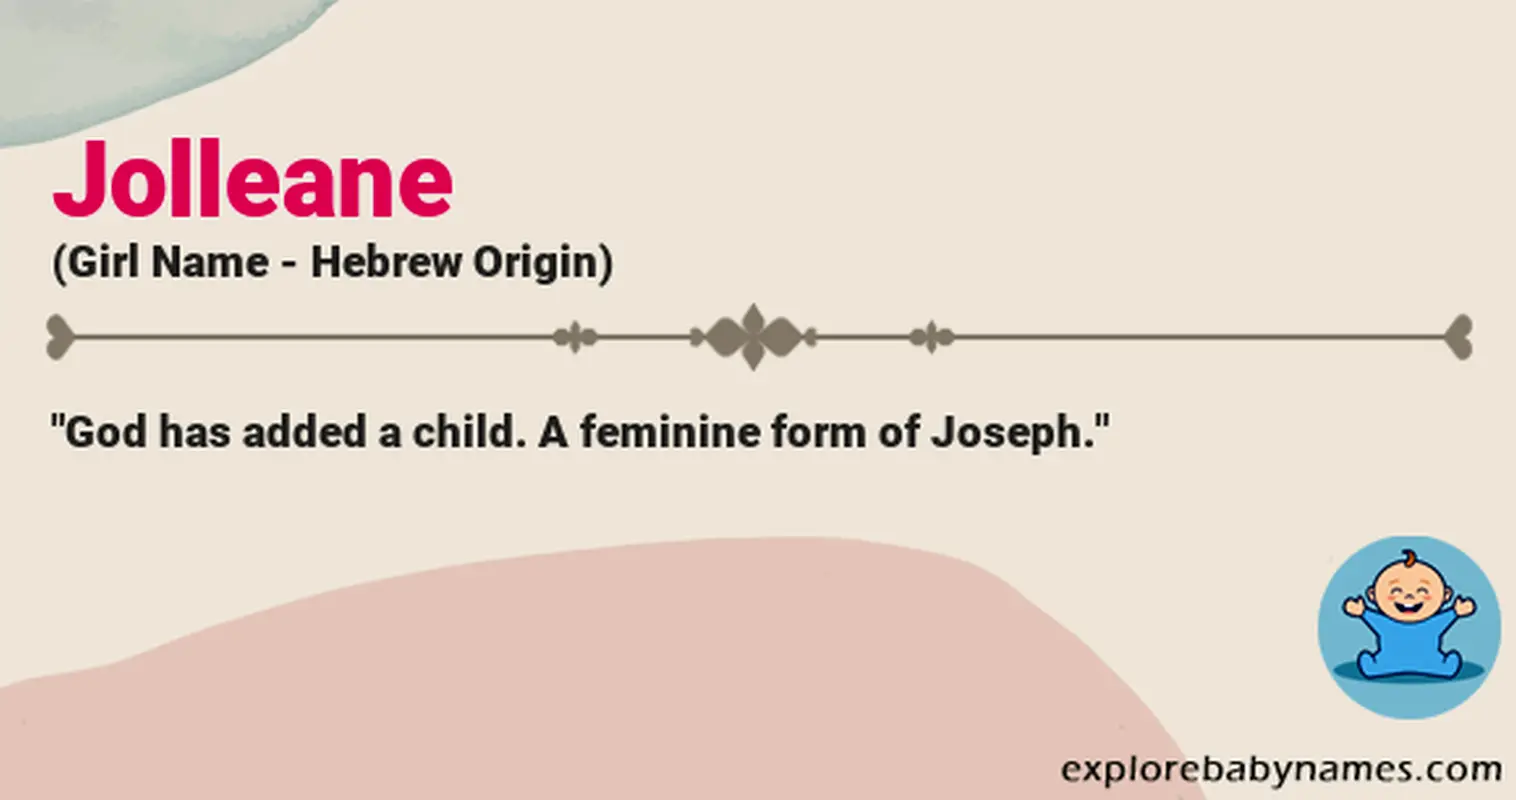 Meaning of Jolleane